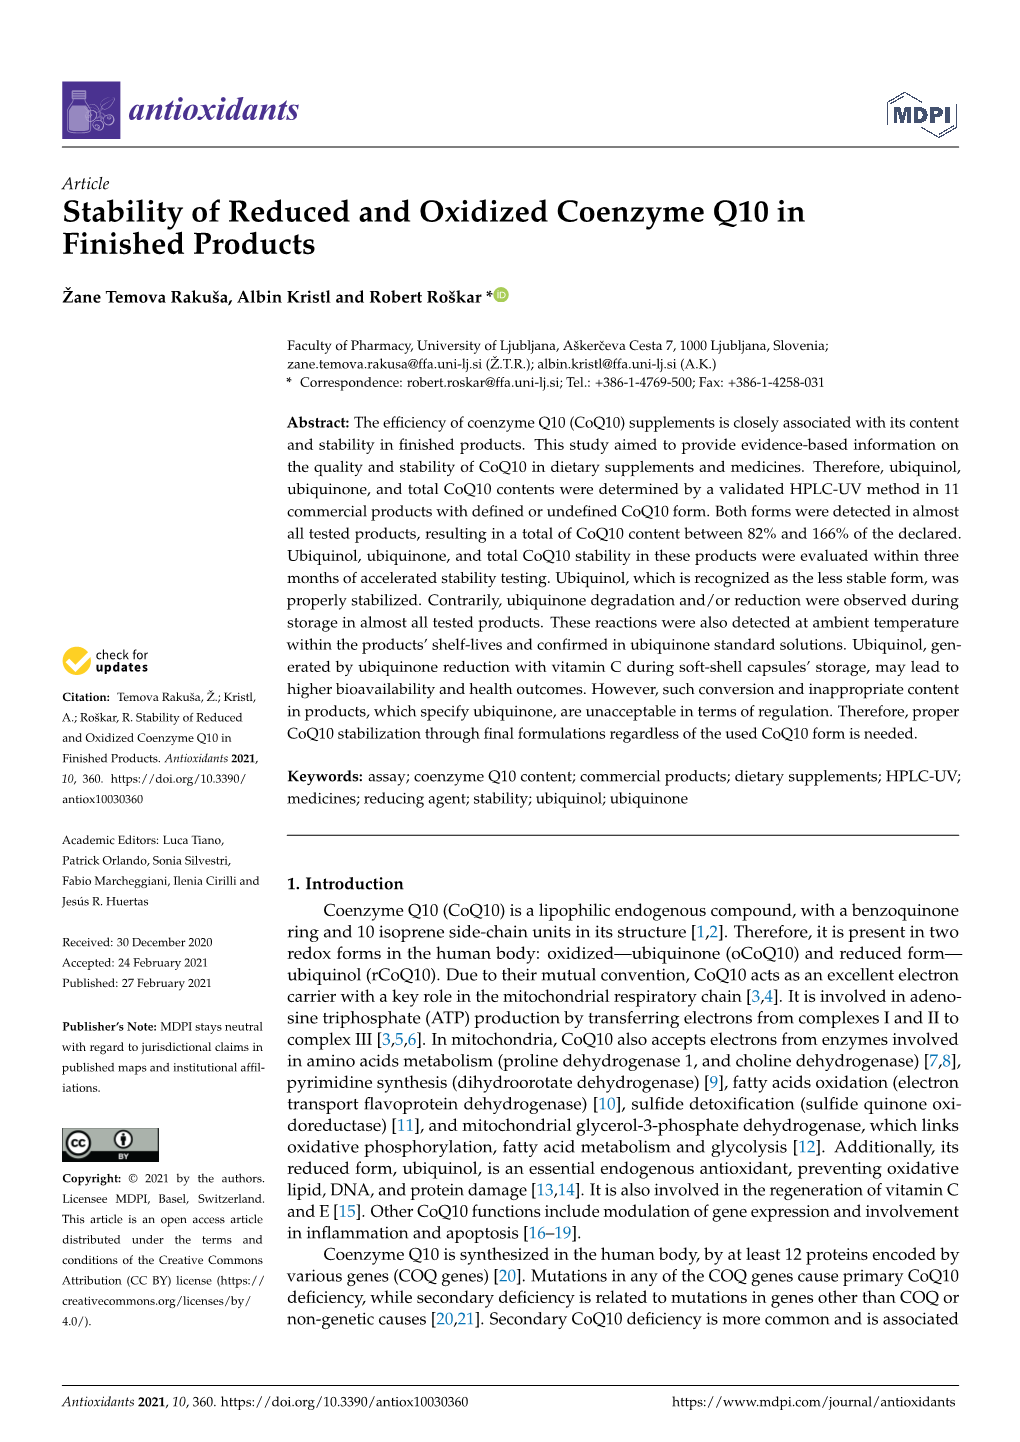 Stability of Reduced and Oxidized Coenzyme Q10 in Finished Products